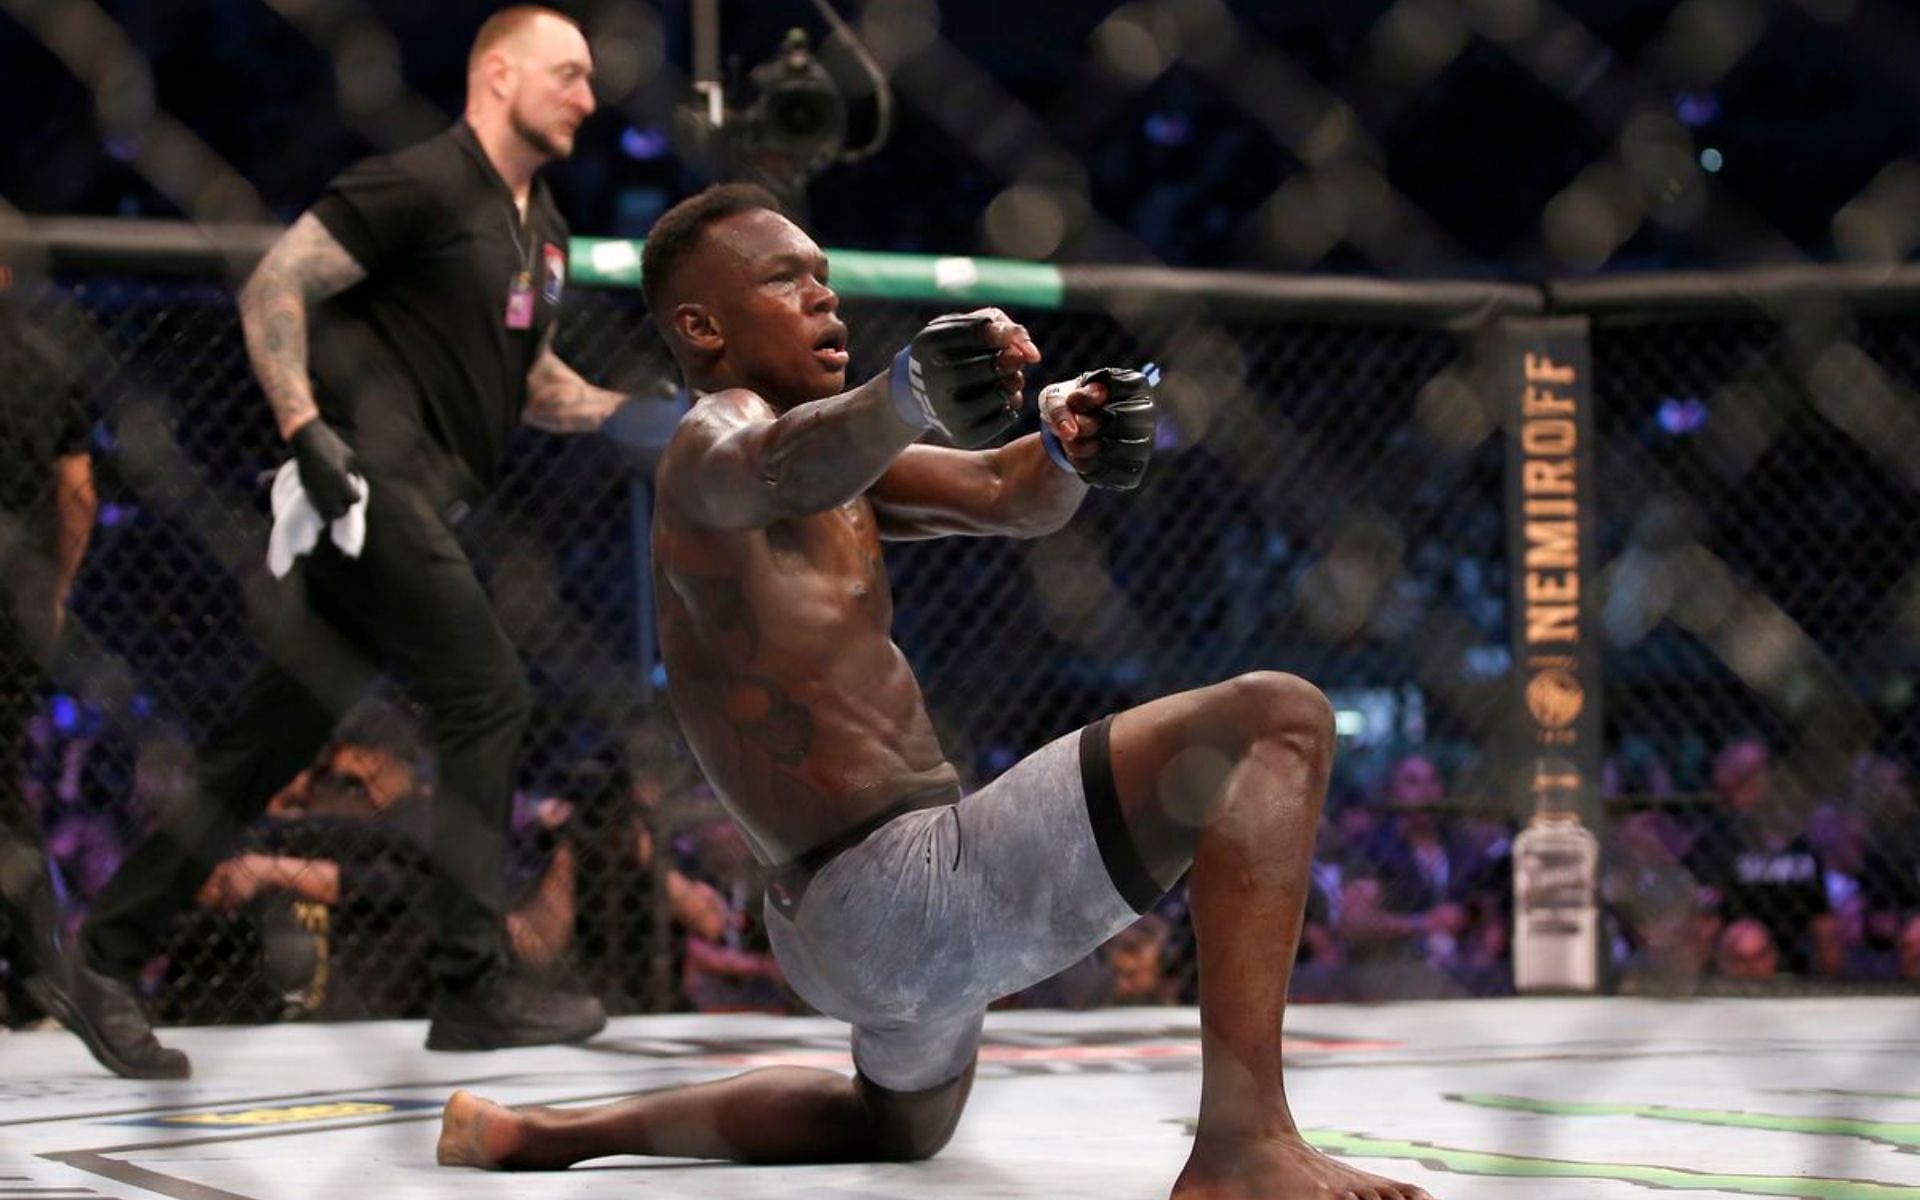 Israel Adesanya has ruled over the UFC middleweight division for over three years